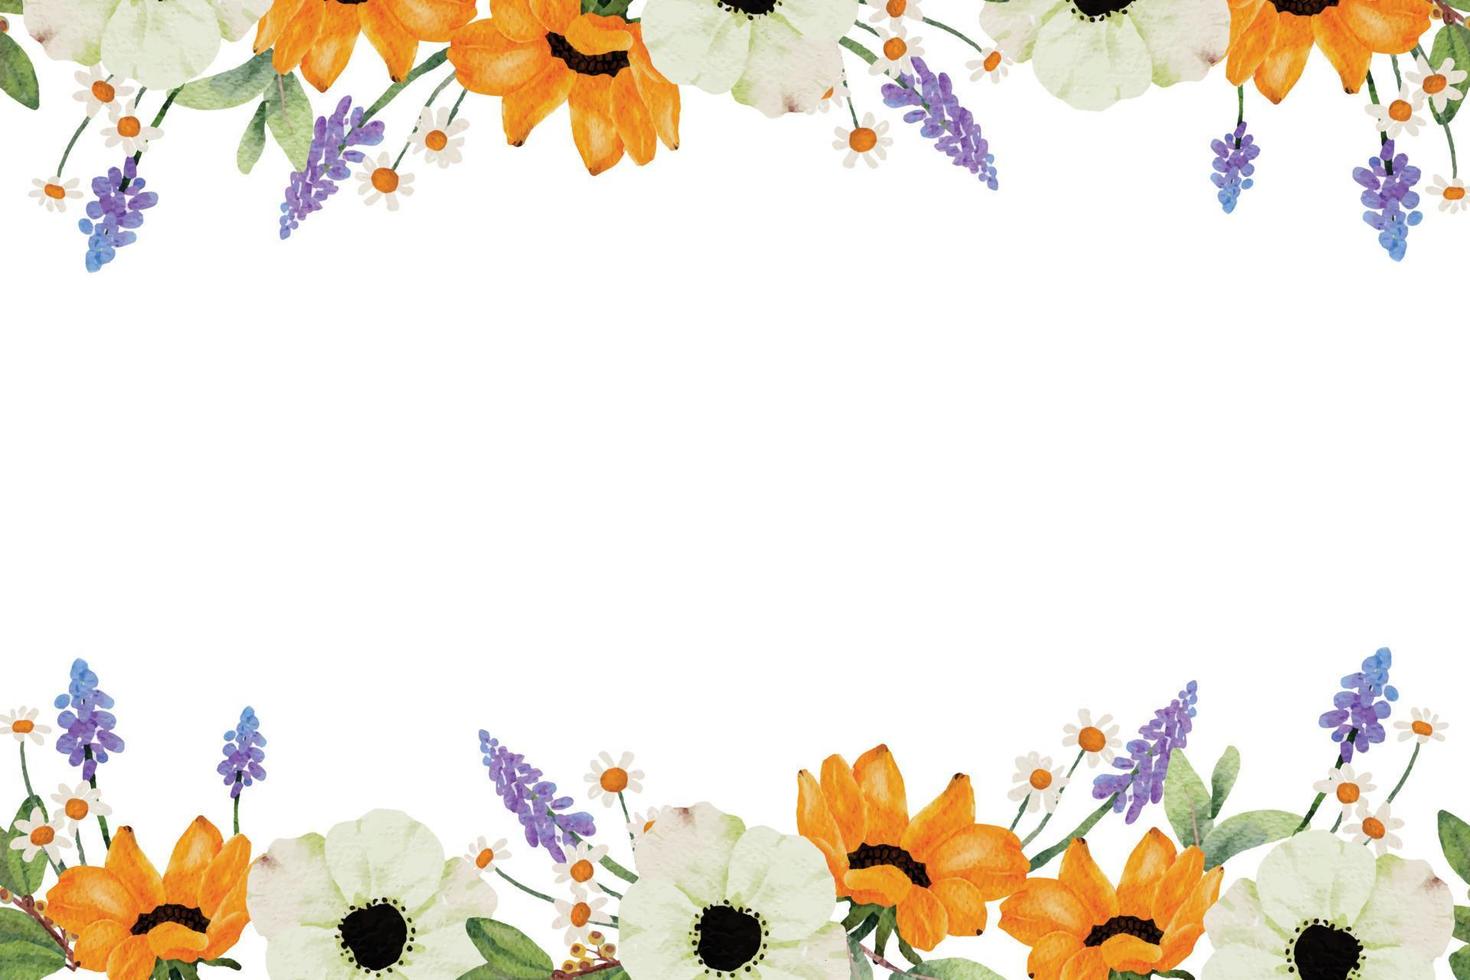 watercoolor yellow sunflower and white anemone flower bouquet banner background vector